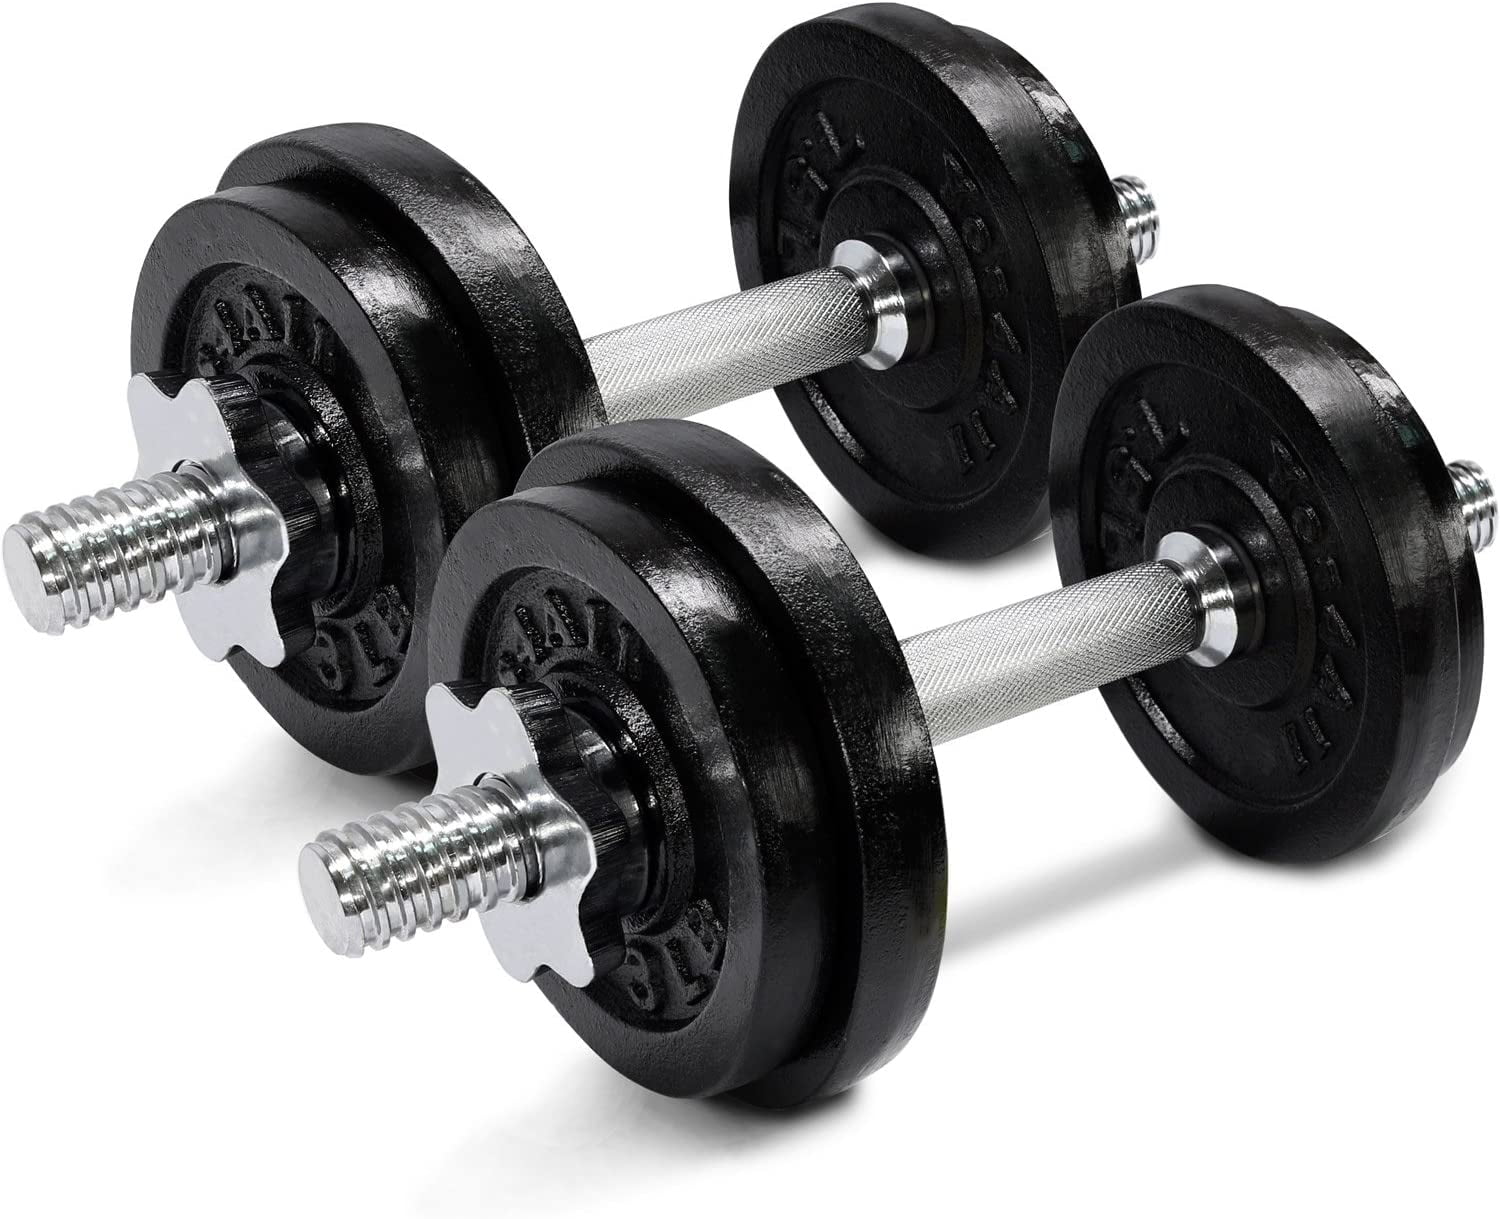 2 x 52.5 lb Like Bowflex Yes4All 105 lb Adjustable Dumbbell Weight Set 